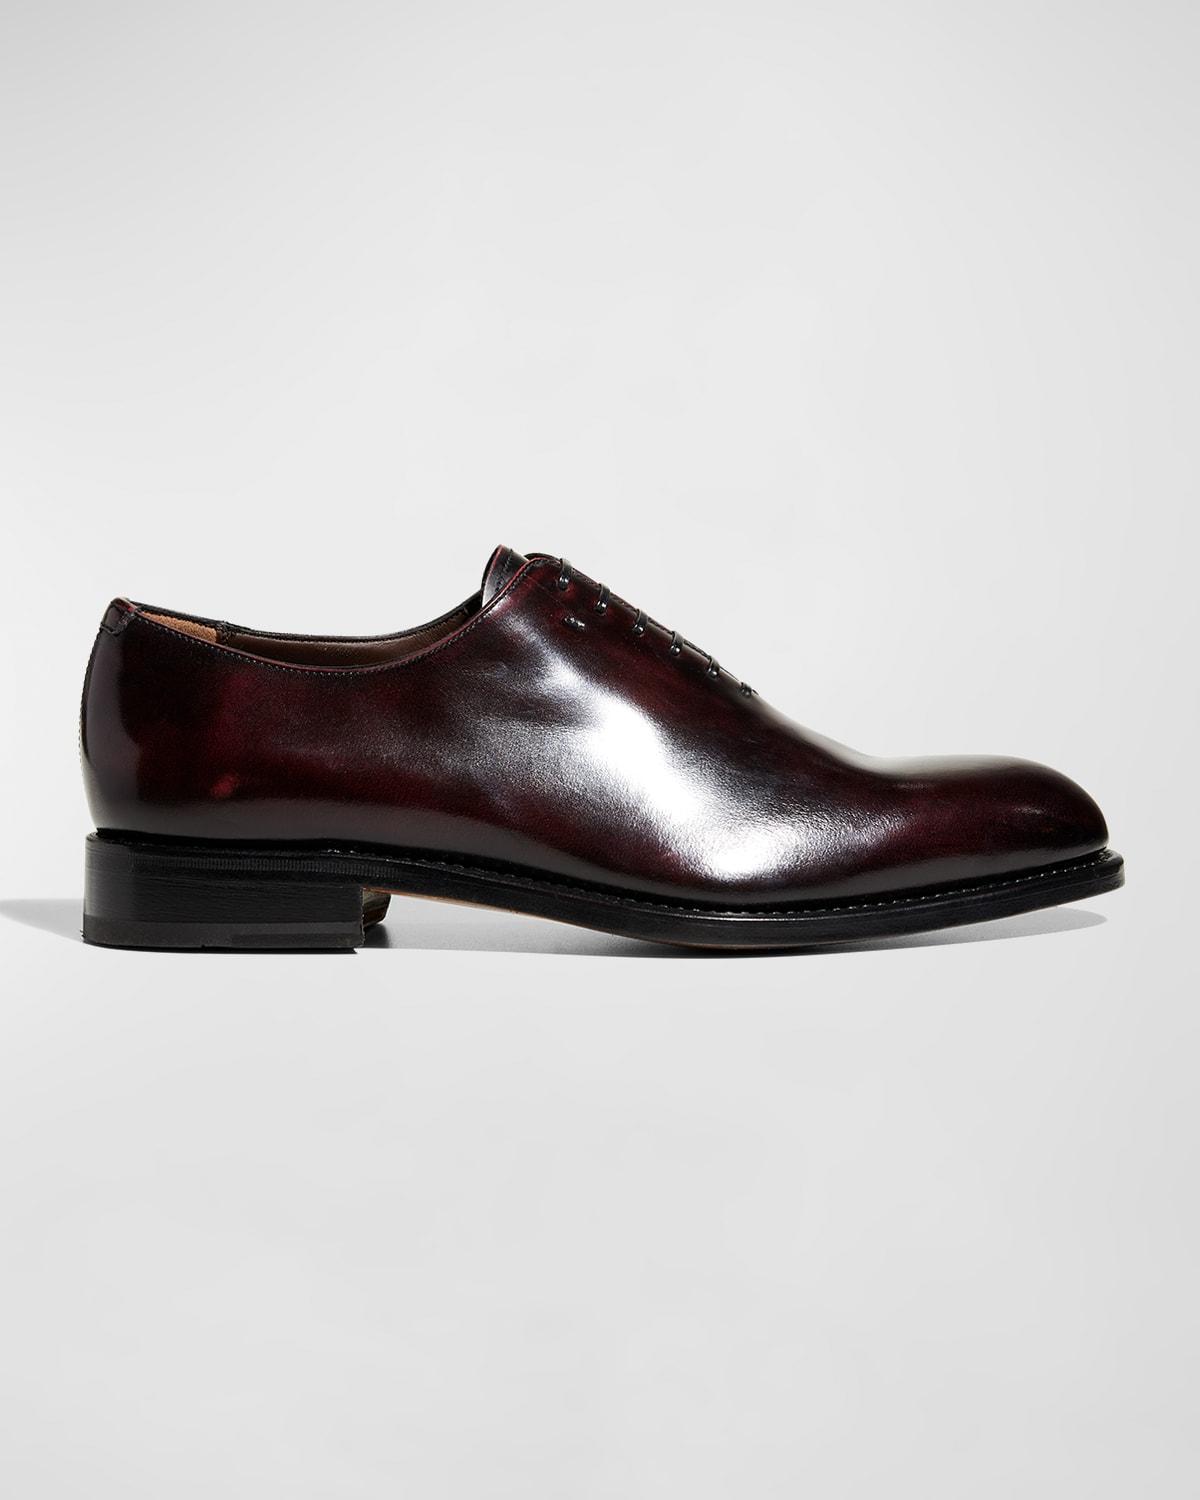 Mens Angiolo Leather Oxfords Product Image